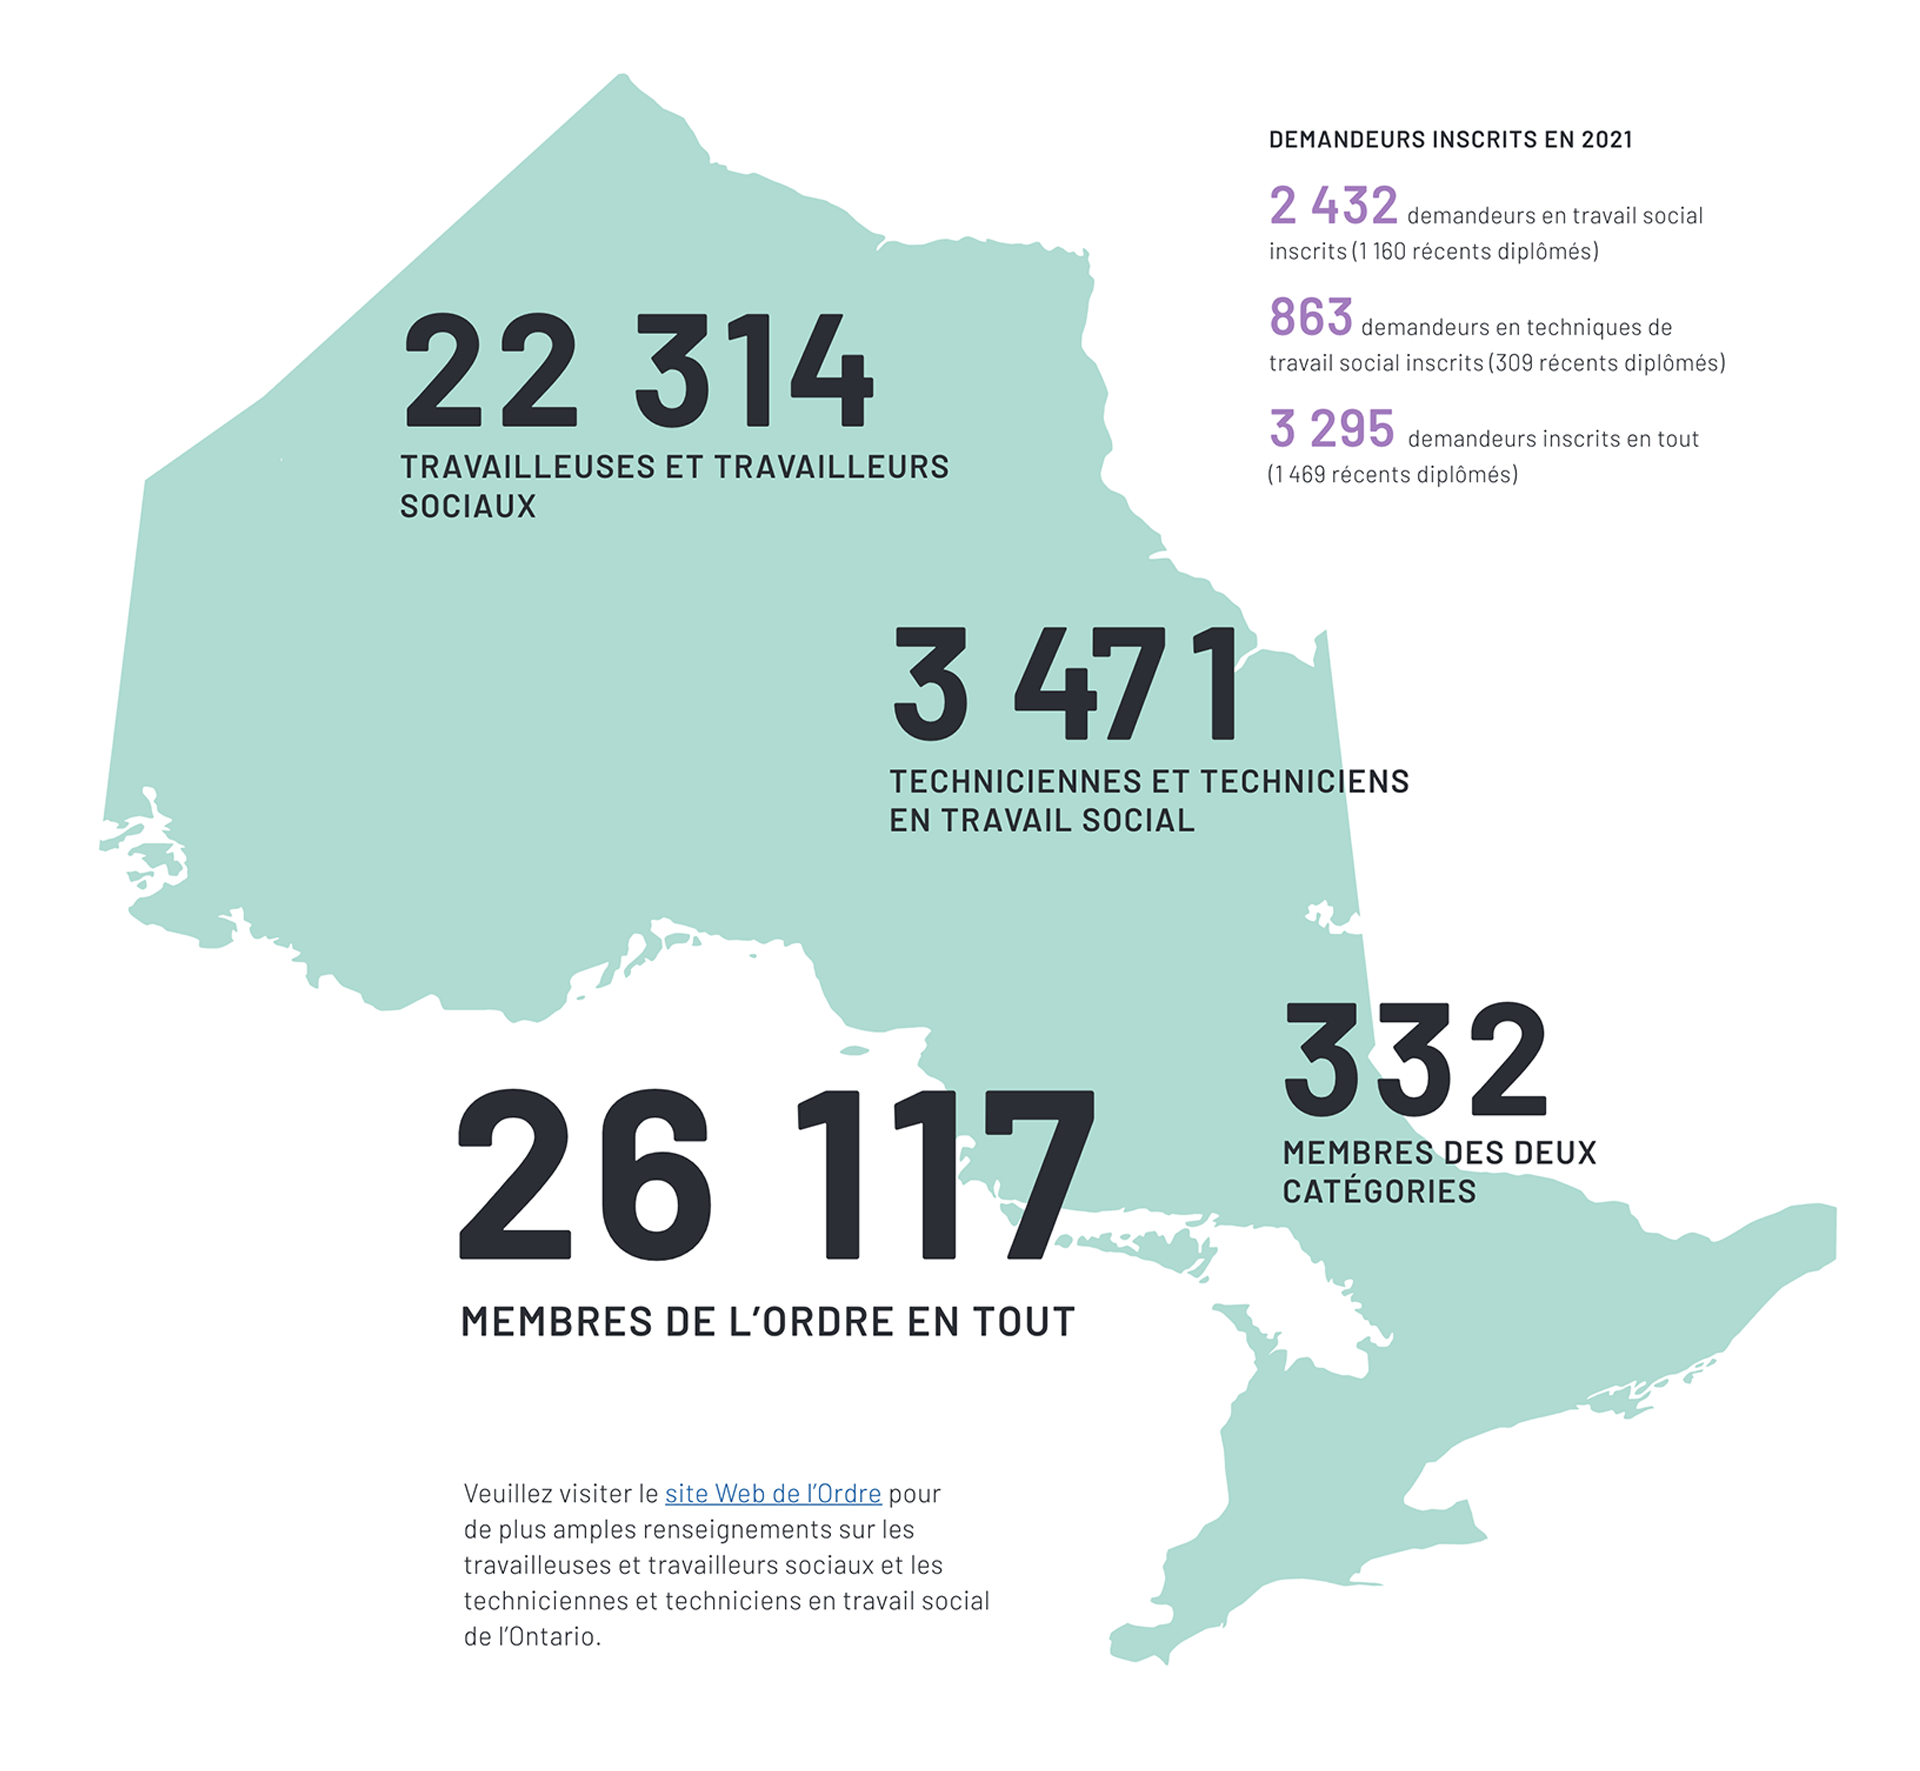 SOCIAL WORKERS AND SOCIAL SERVICE WORKERS IN ONTARIO